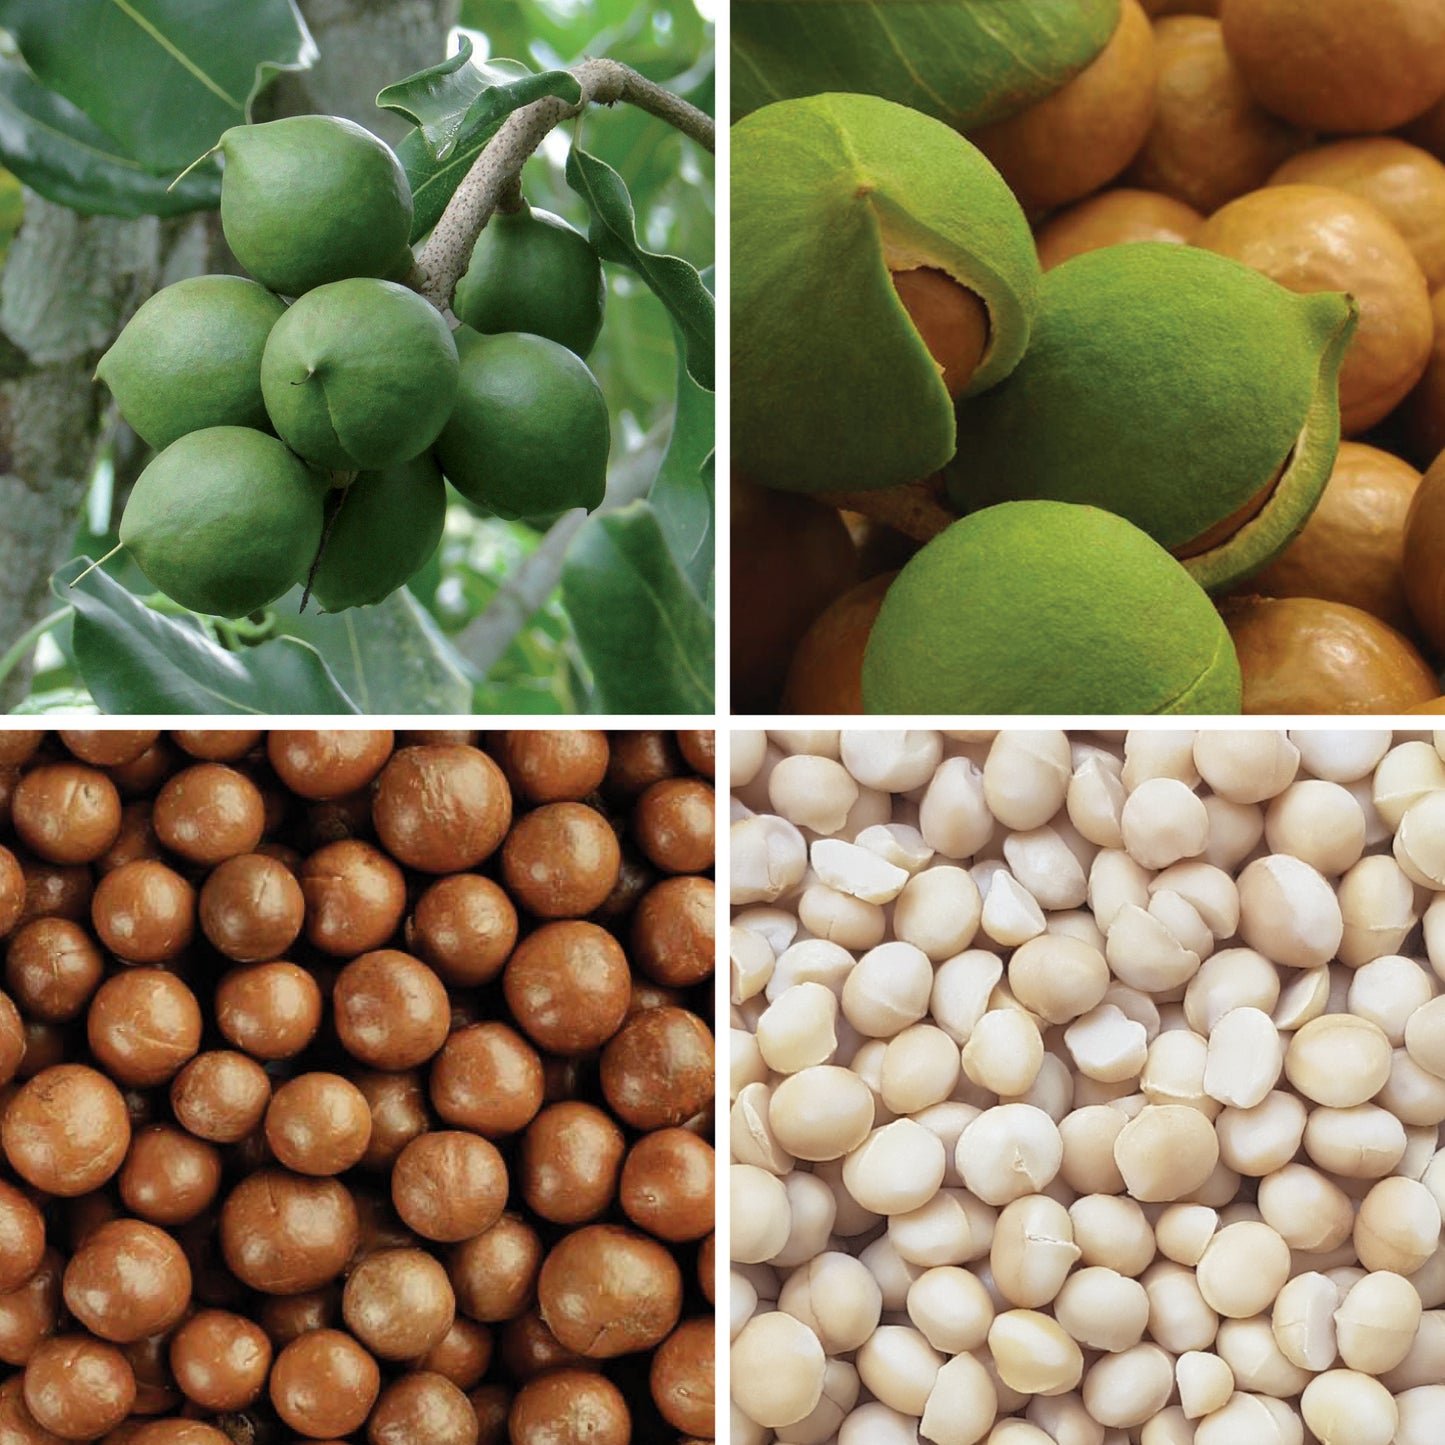 BY NATURE Macadamias - Certified Organic at Source